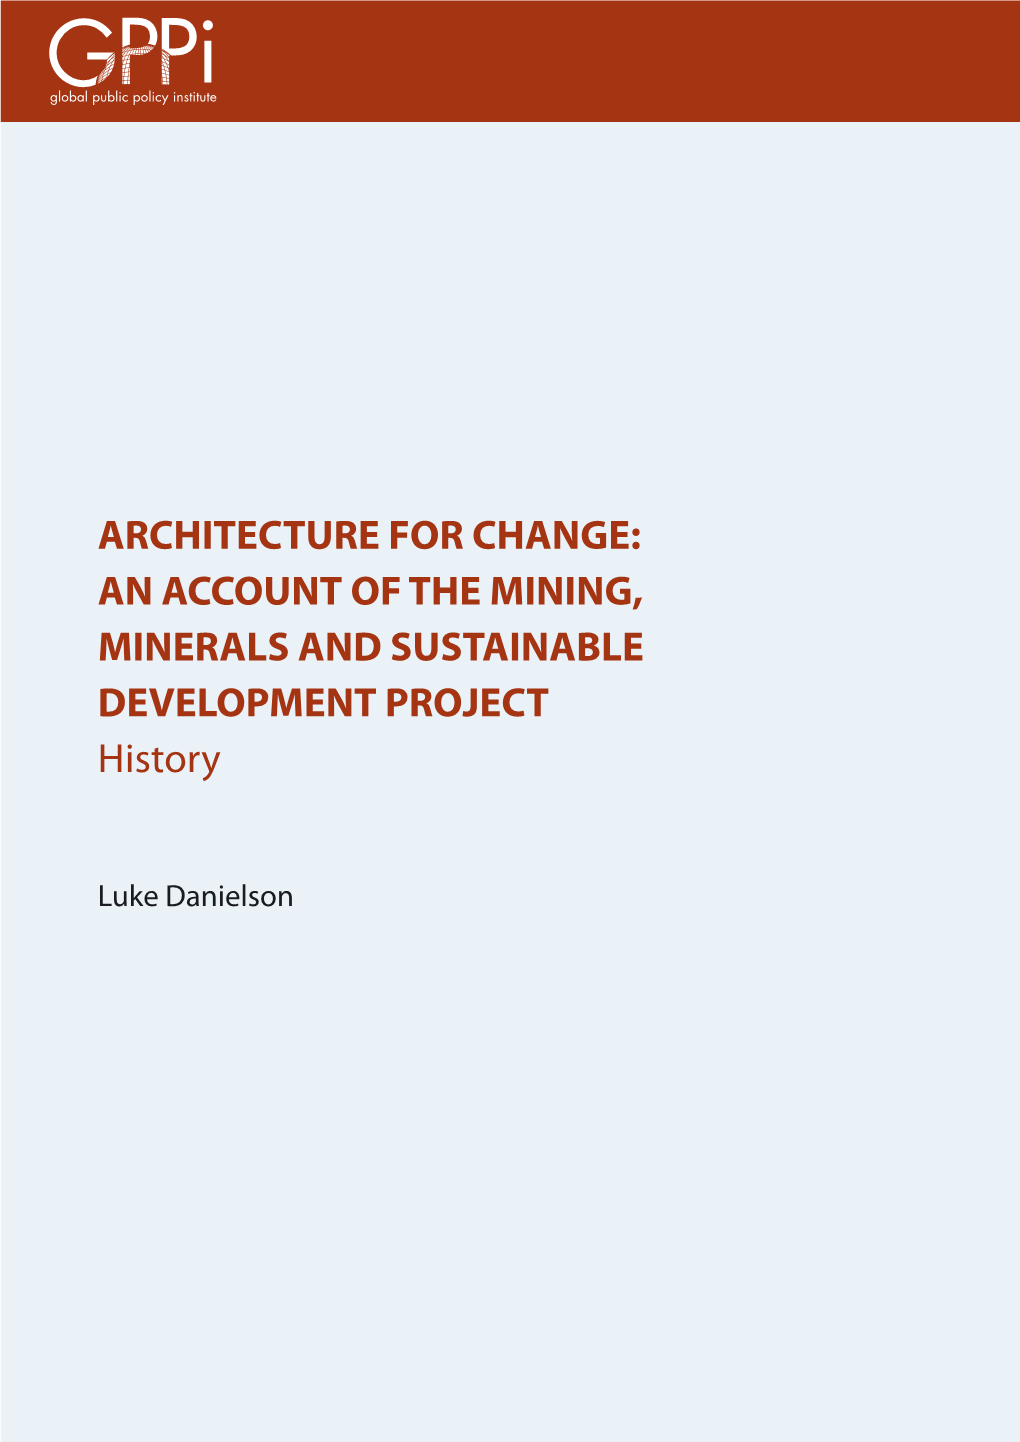 ARCHITECTURE for CHANGE—History